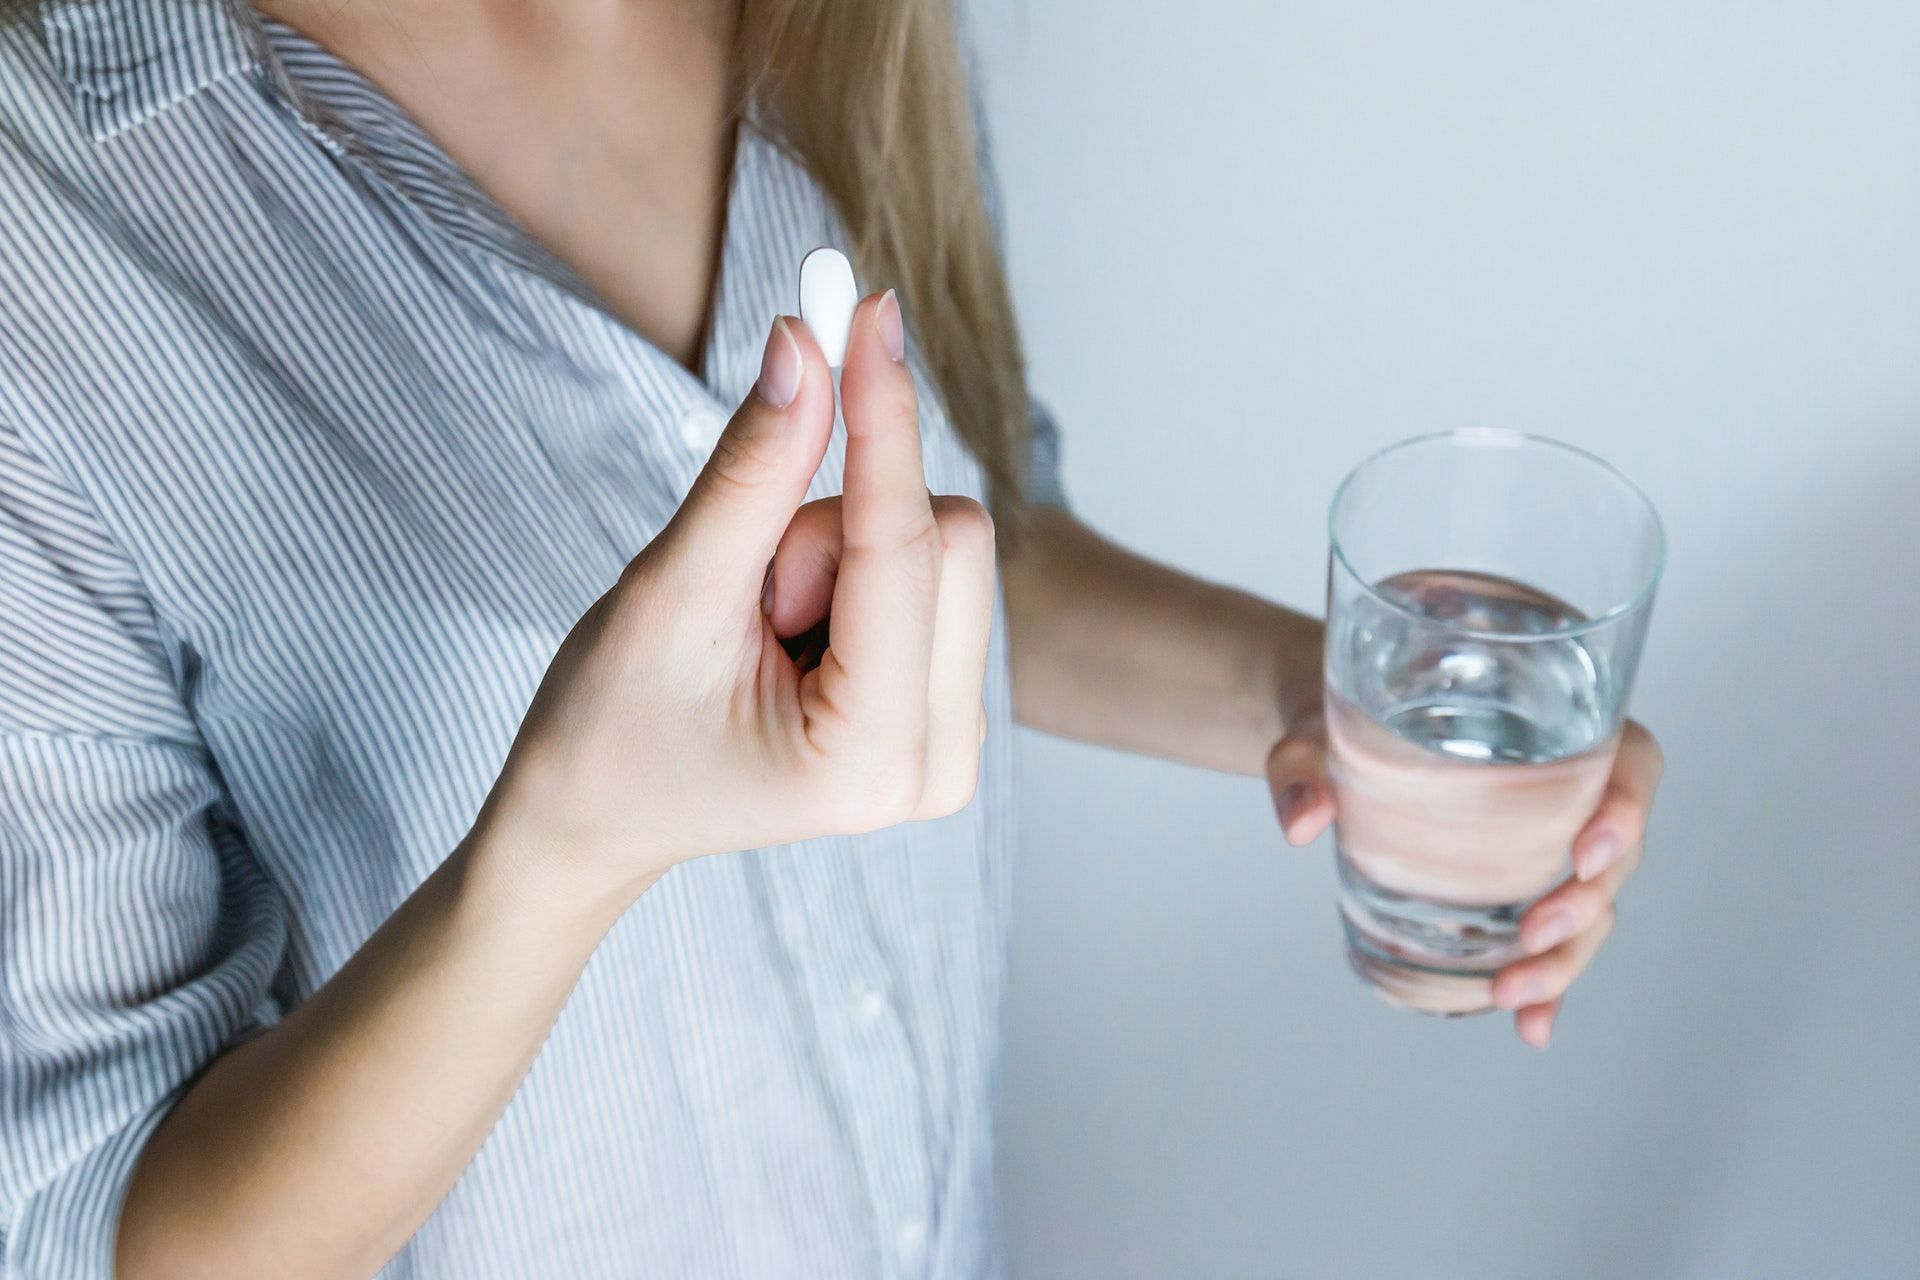 Take medicines as prescribed by the doctor. (Photo via Pexels/JESHOOTS.com)